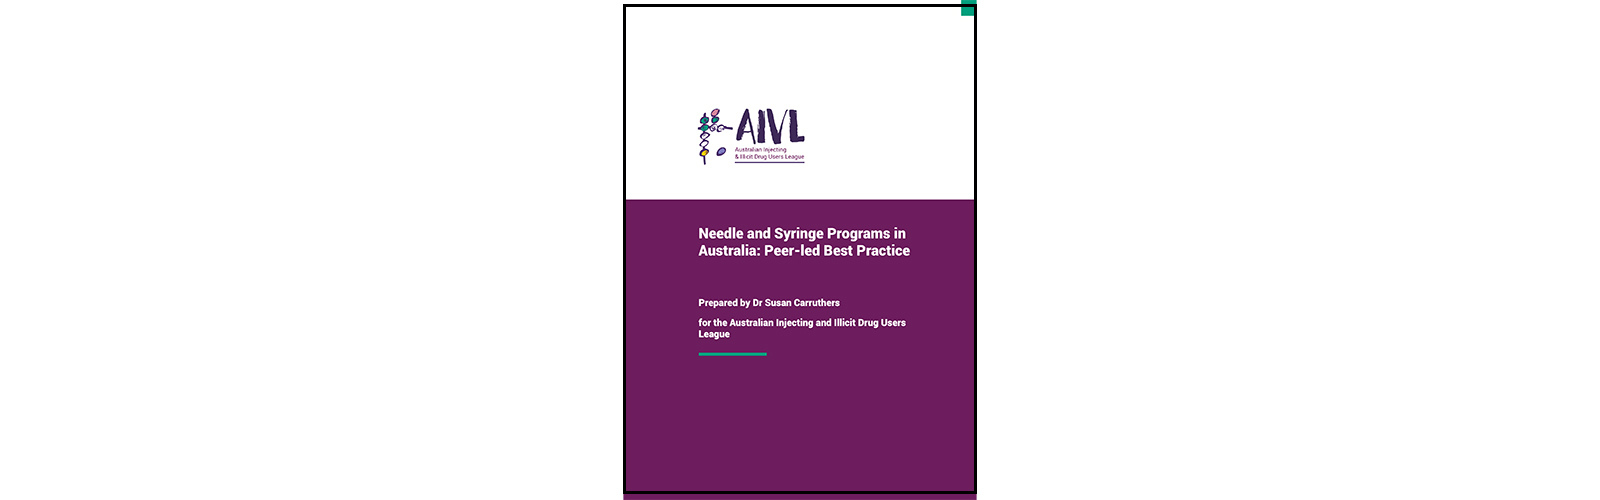 Featured image for “Needle and Syringe Programs in Australia: Peer-led Best Practice (the Guide)”